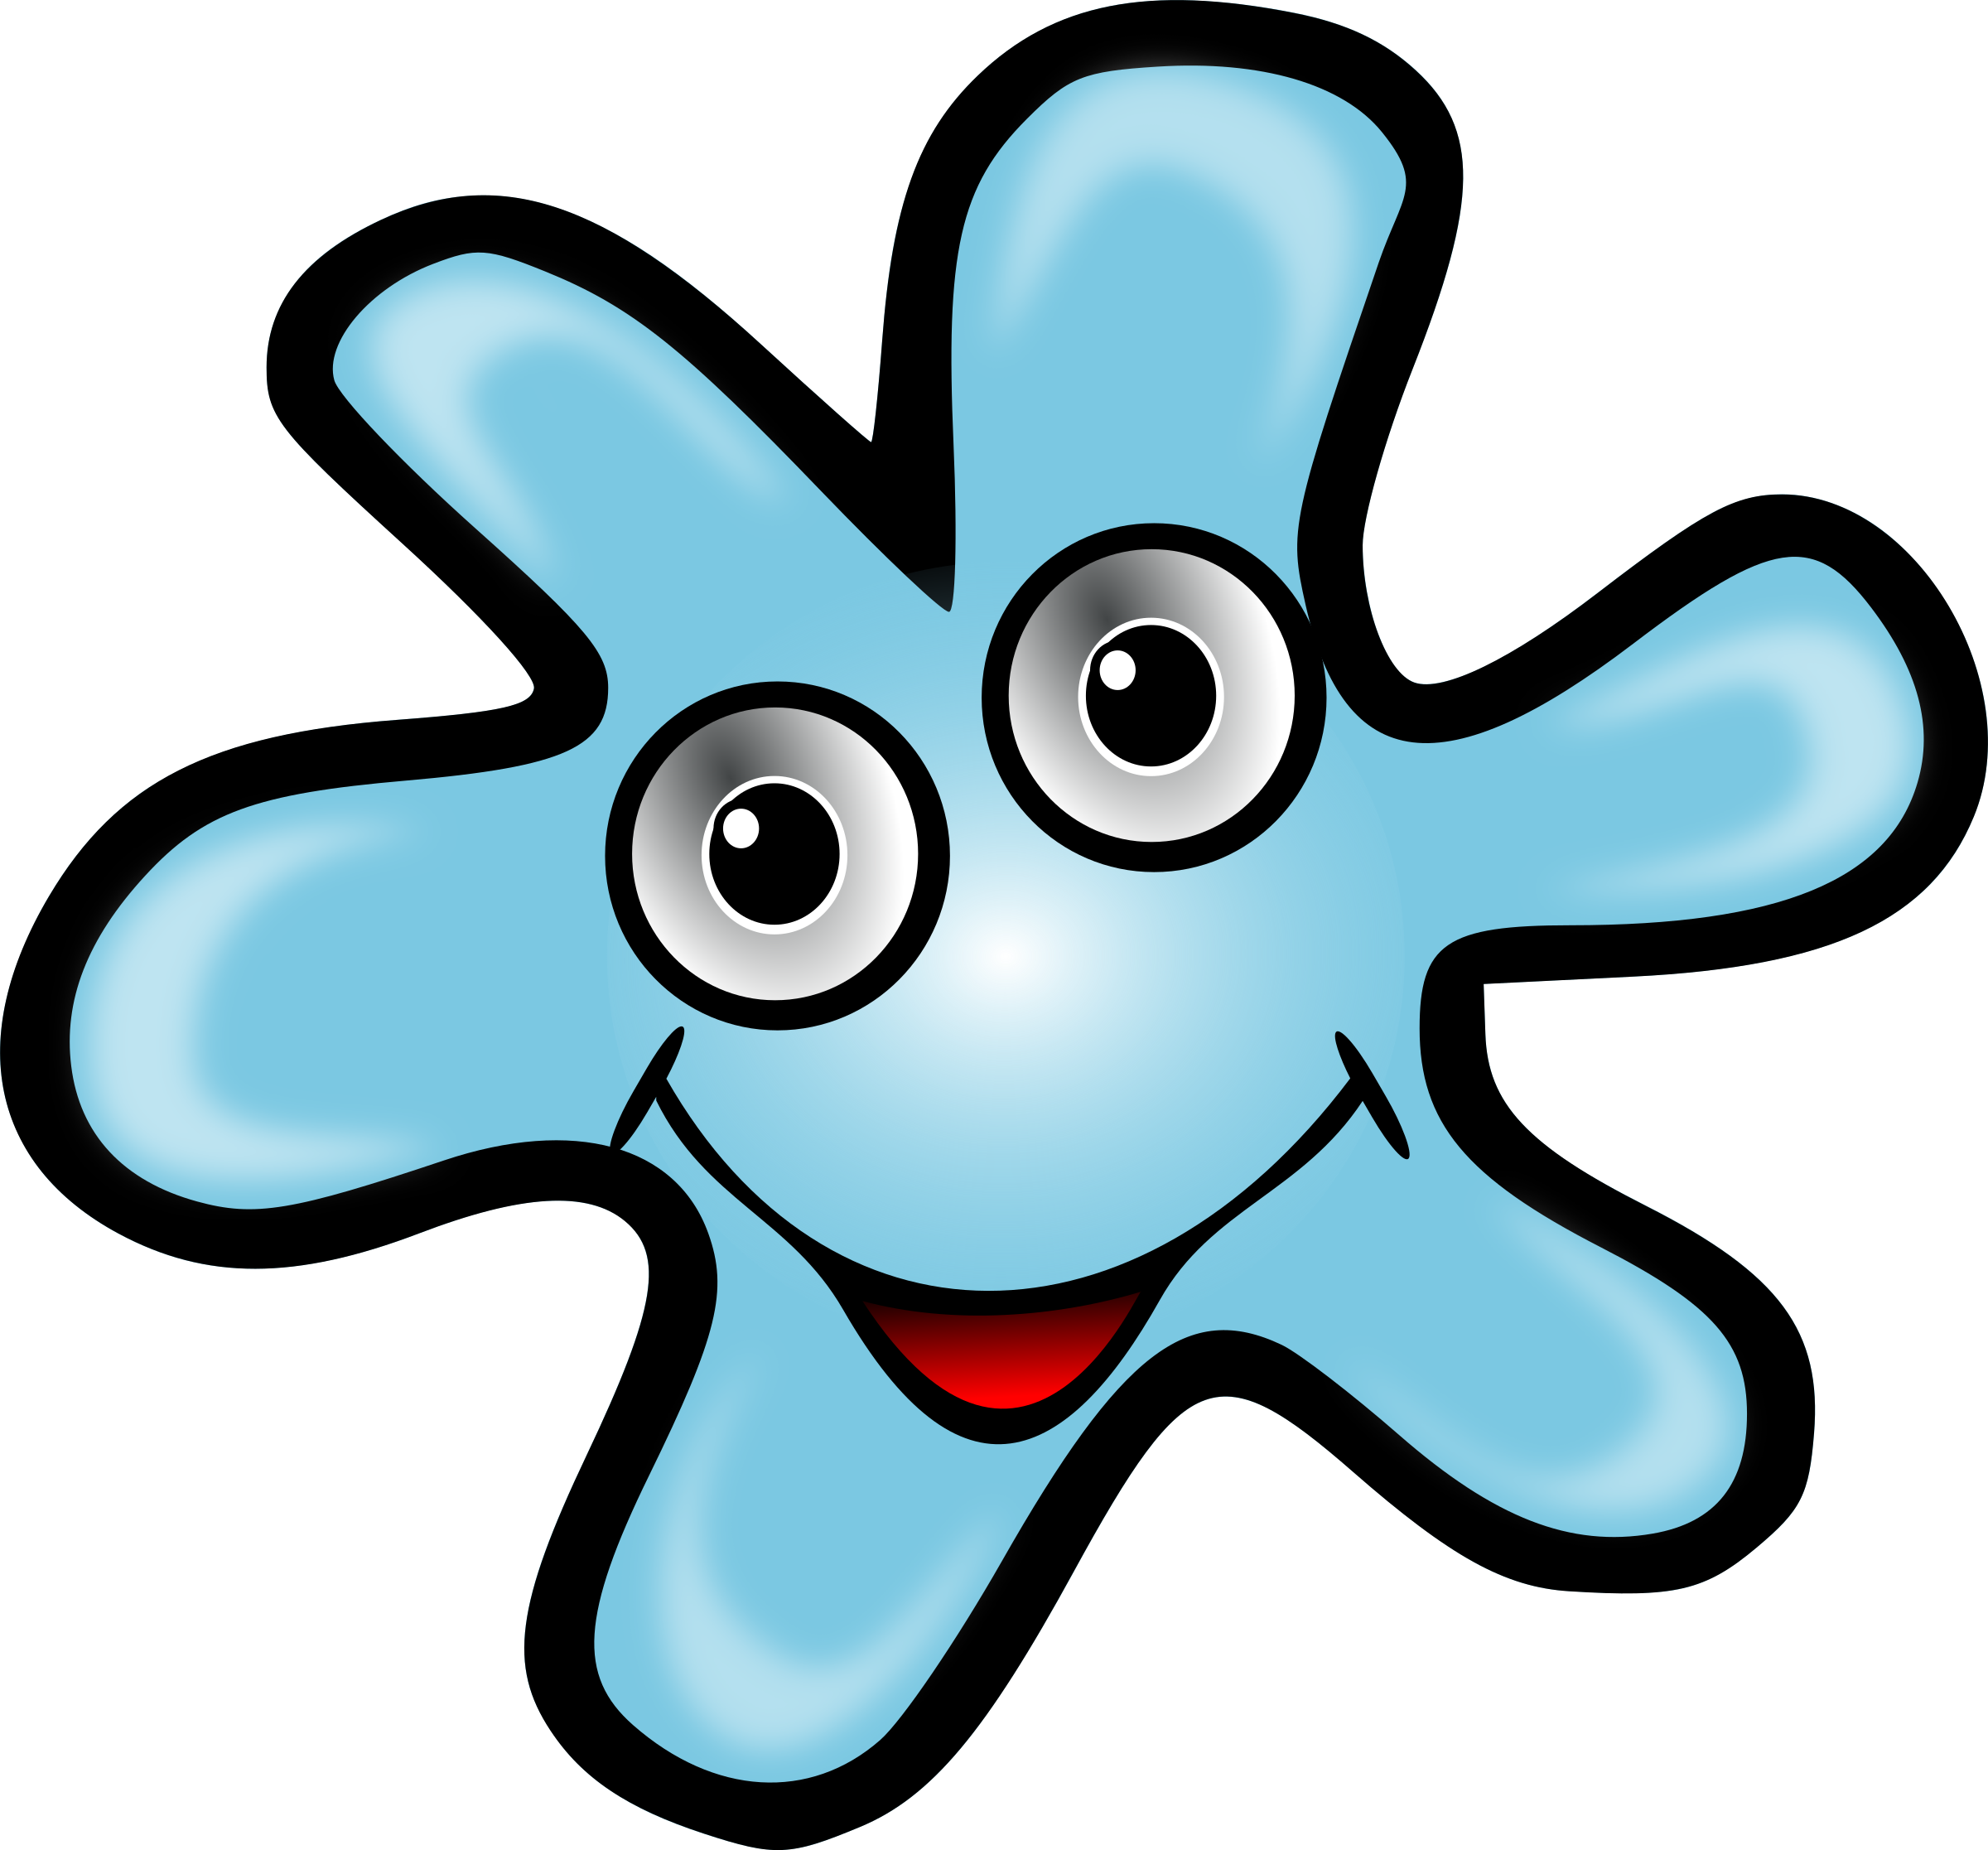 A Cartoon Blue Blot With A Smiling Face